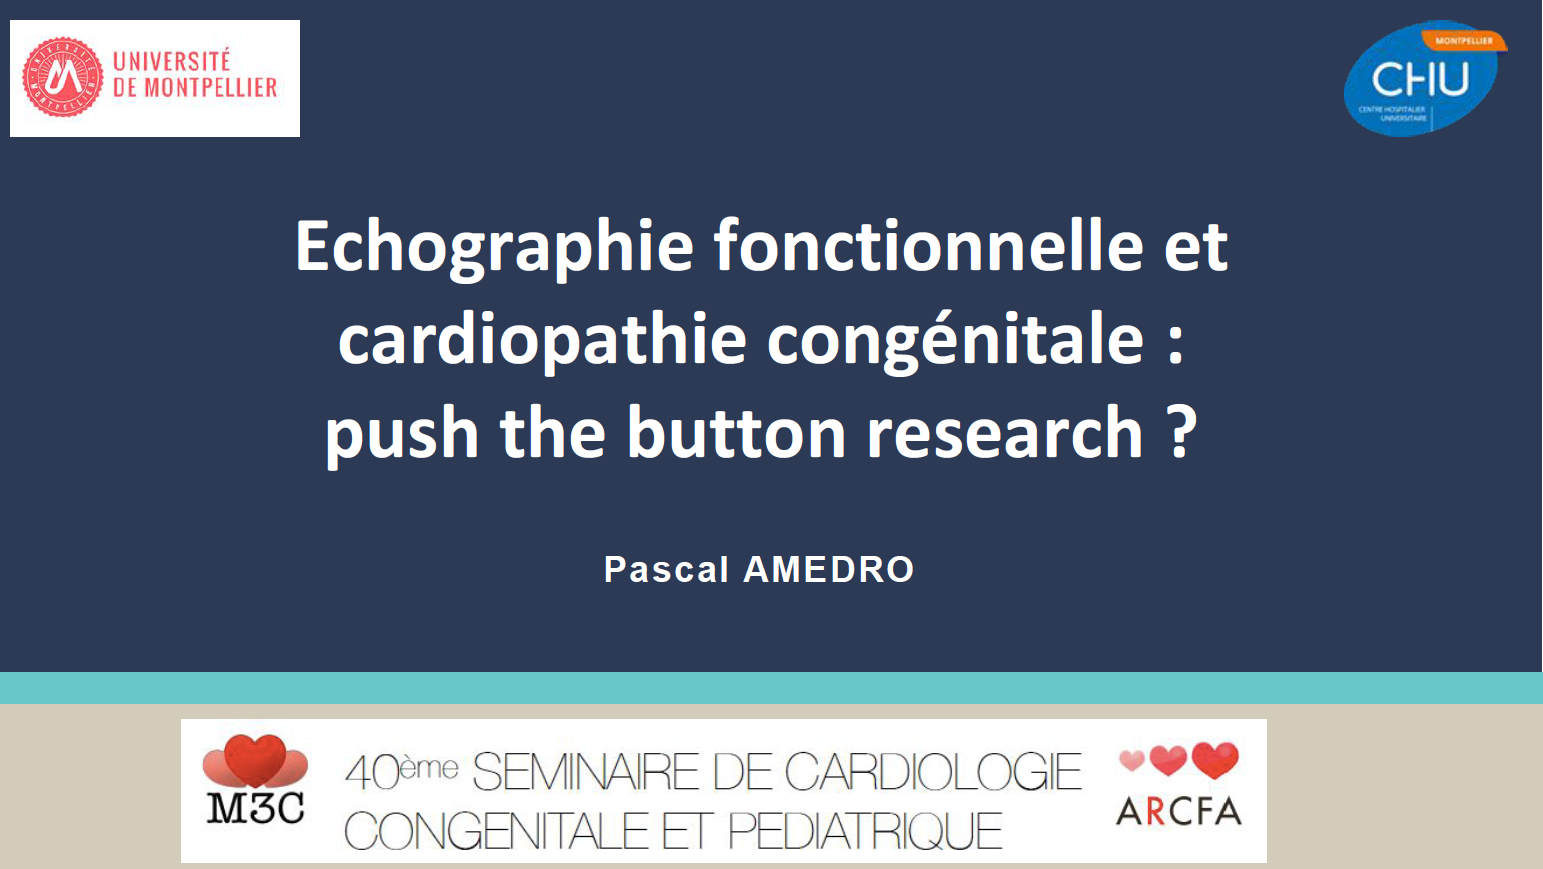 Echographie fonctionnelle push the button research - Pascal Amedro 2019